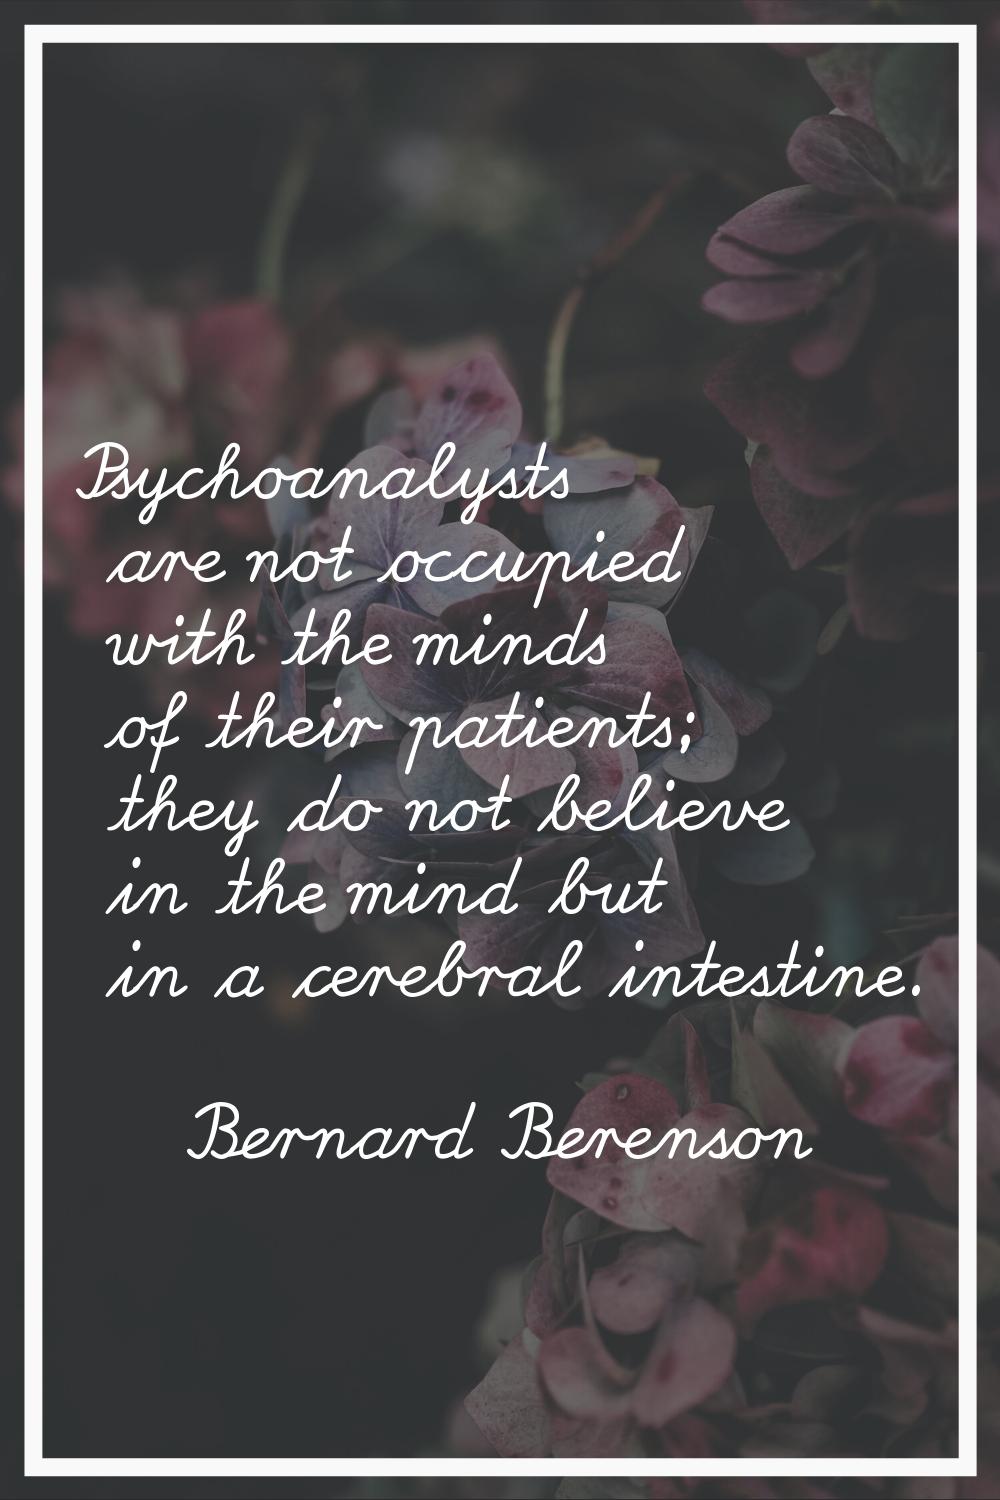 Psychoanalysts are not occupied with the minds of their patients; they do not believe in the mind b